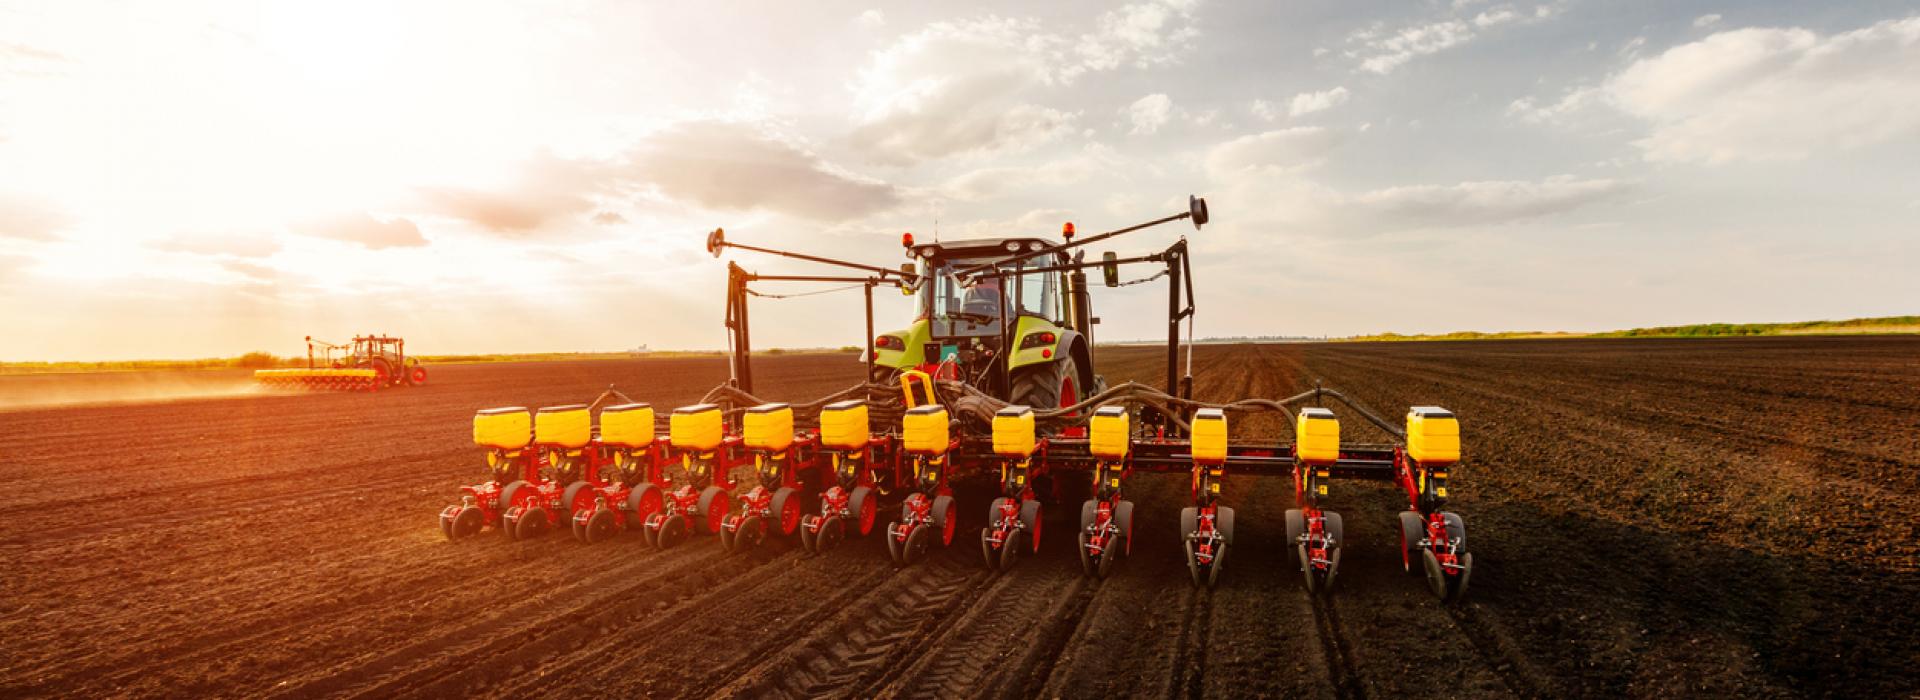 A tractor and planter are pictured planting spring crops at sunset.